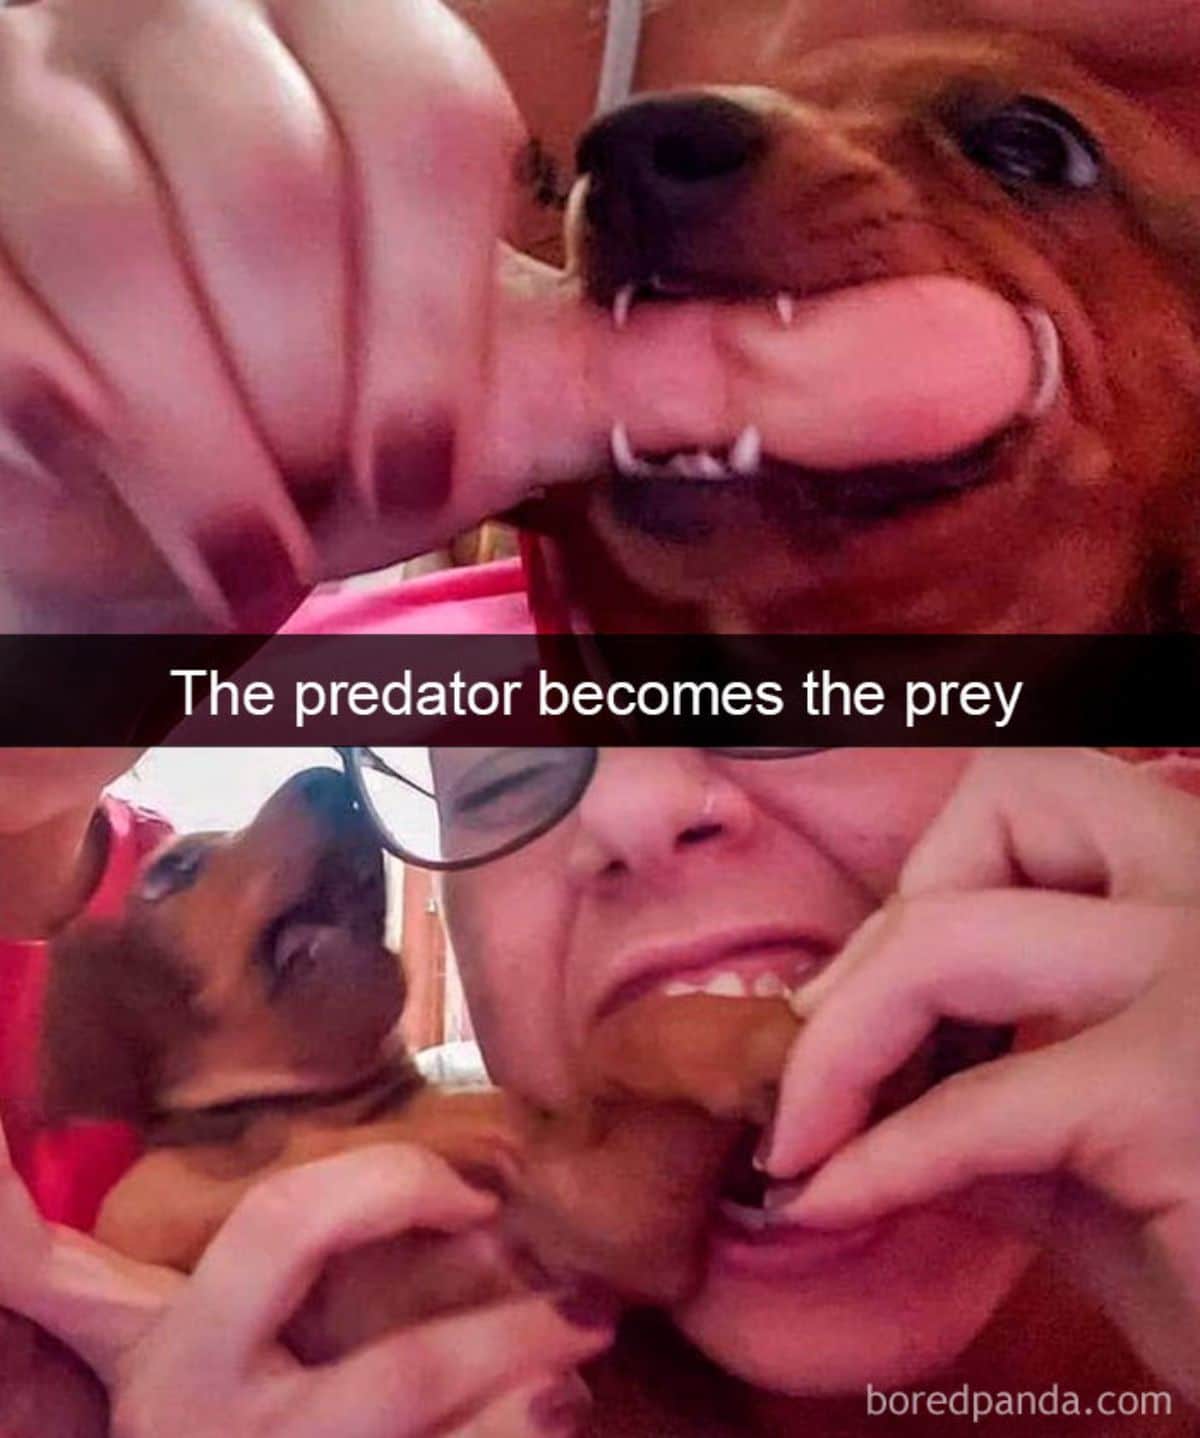 in the first photo a brown dog is biting someone's finger, in the second photo the person is biting the dog's leg with a caption saying the predator becomes the prey